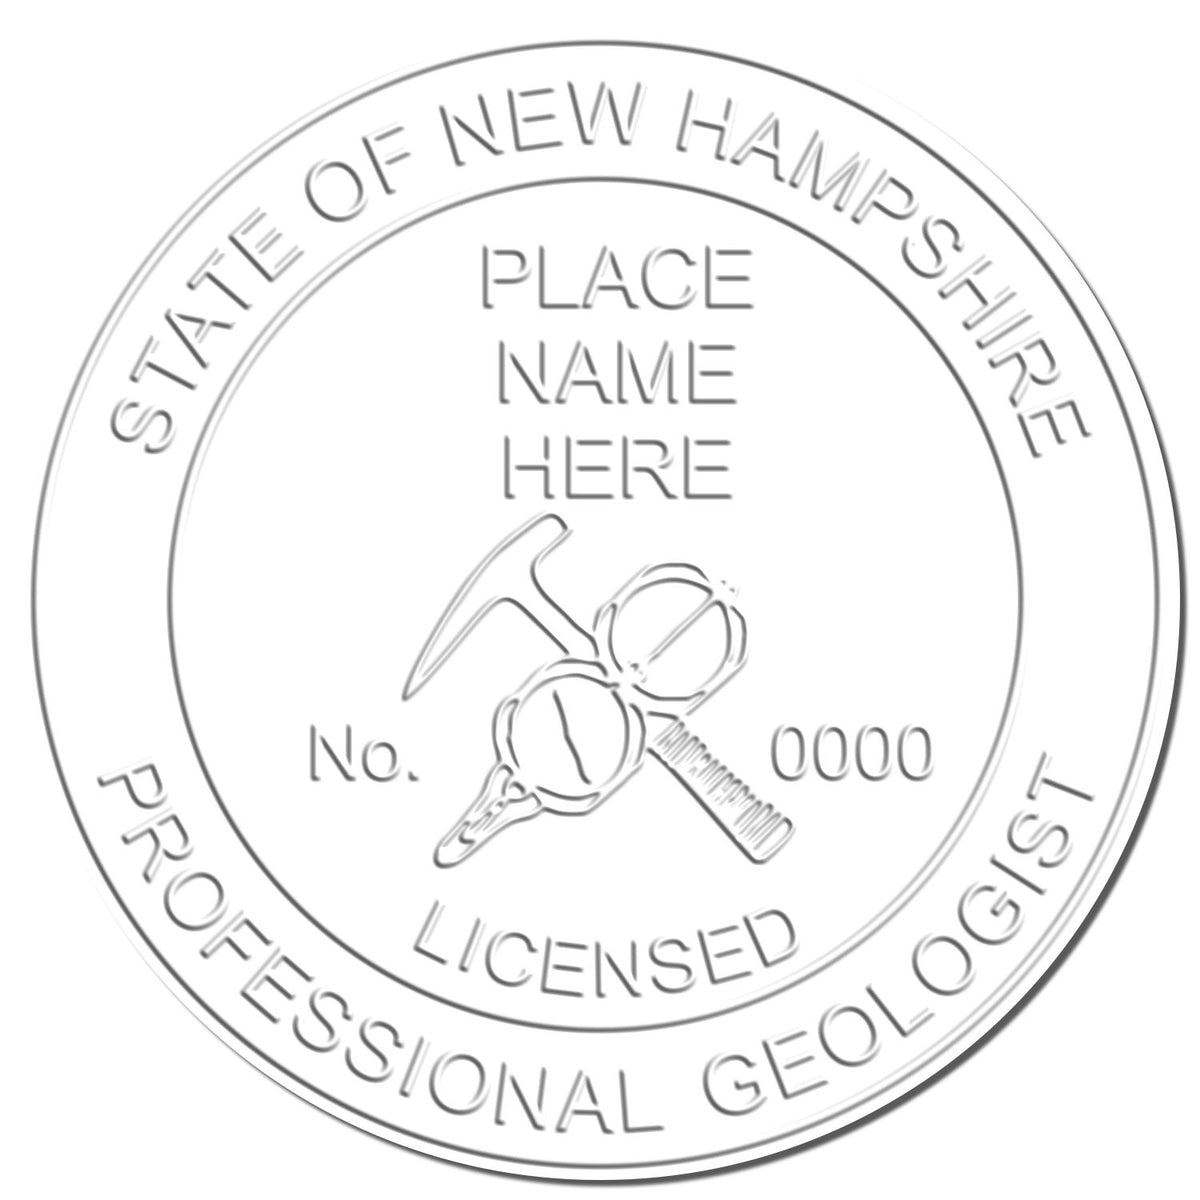 This paper is stamped with a sample imprint of the Handheld New Hampshire Professional Geologist Embosser, signifying its quality and reliability.